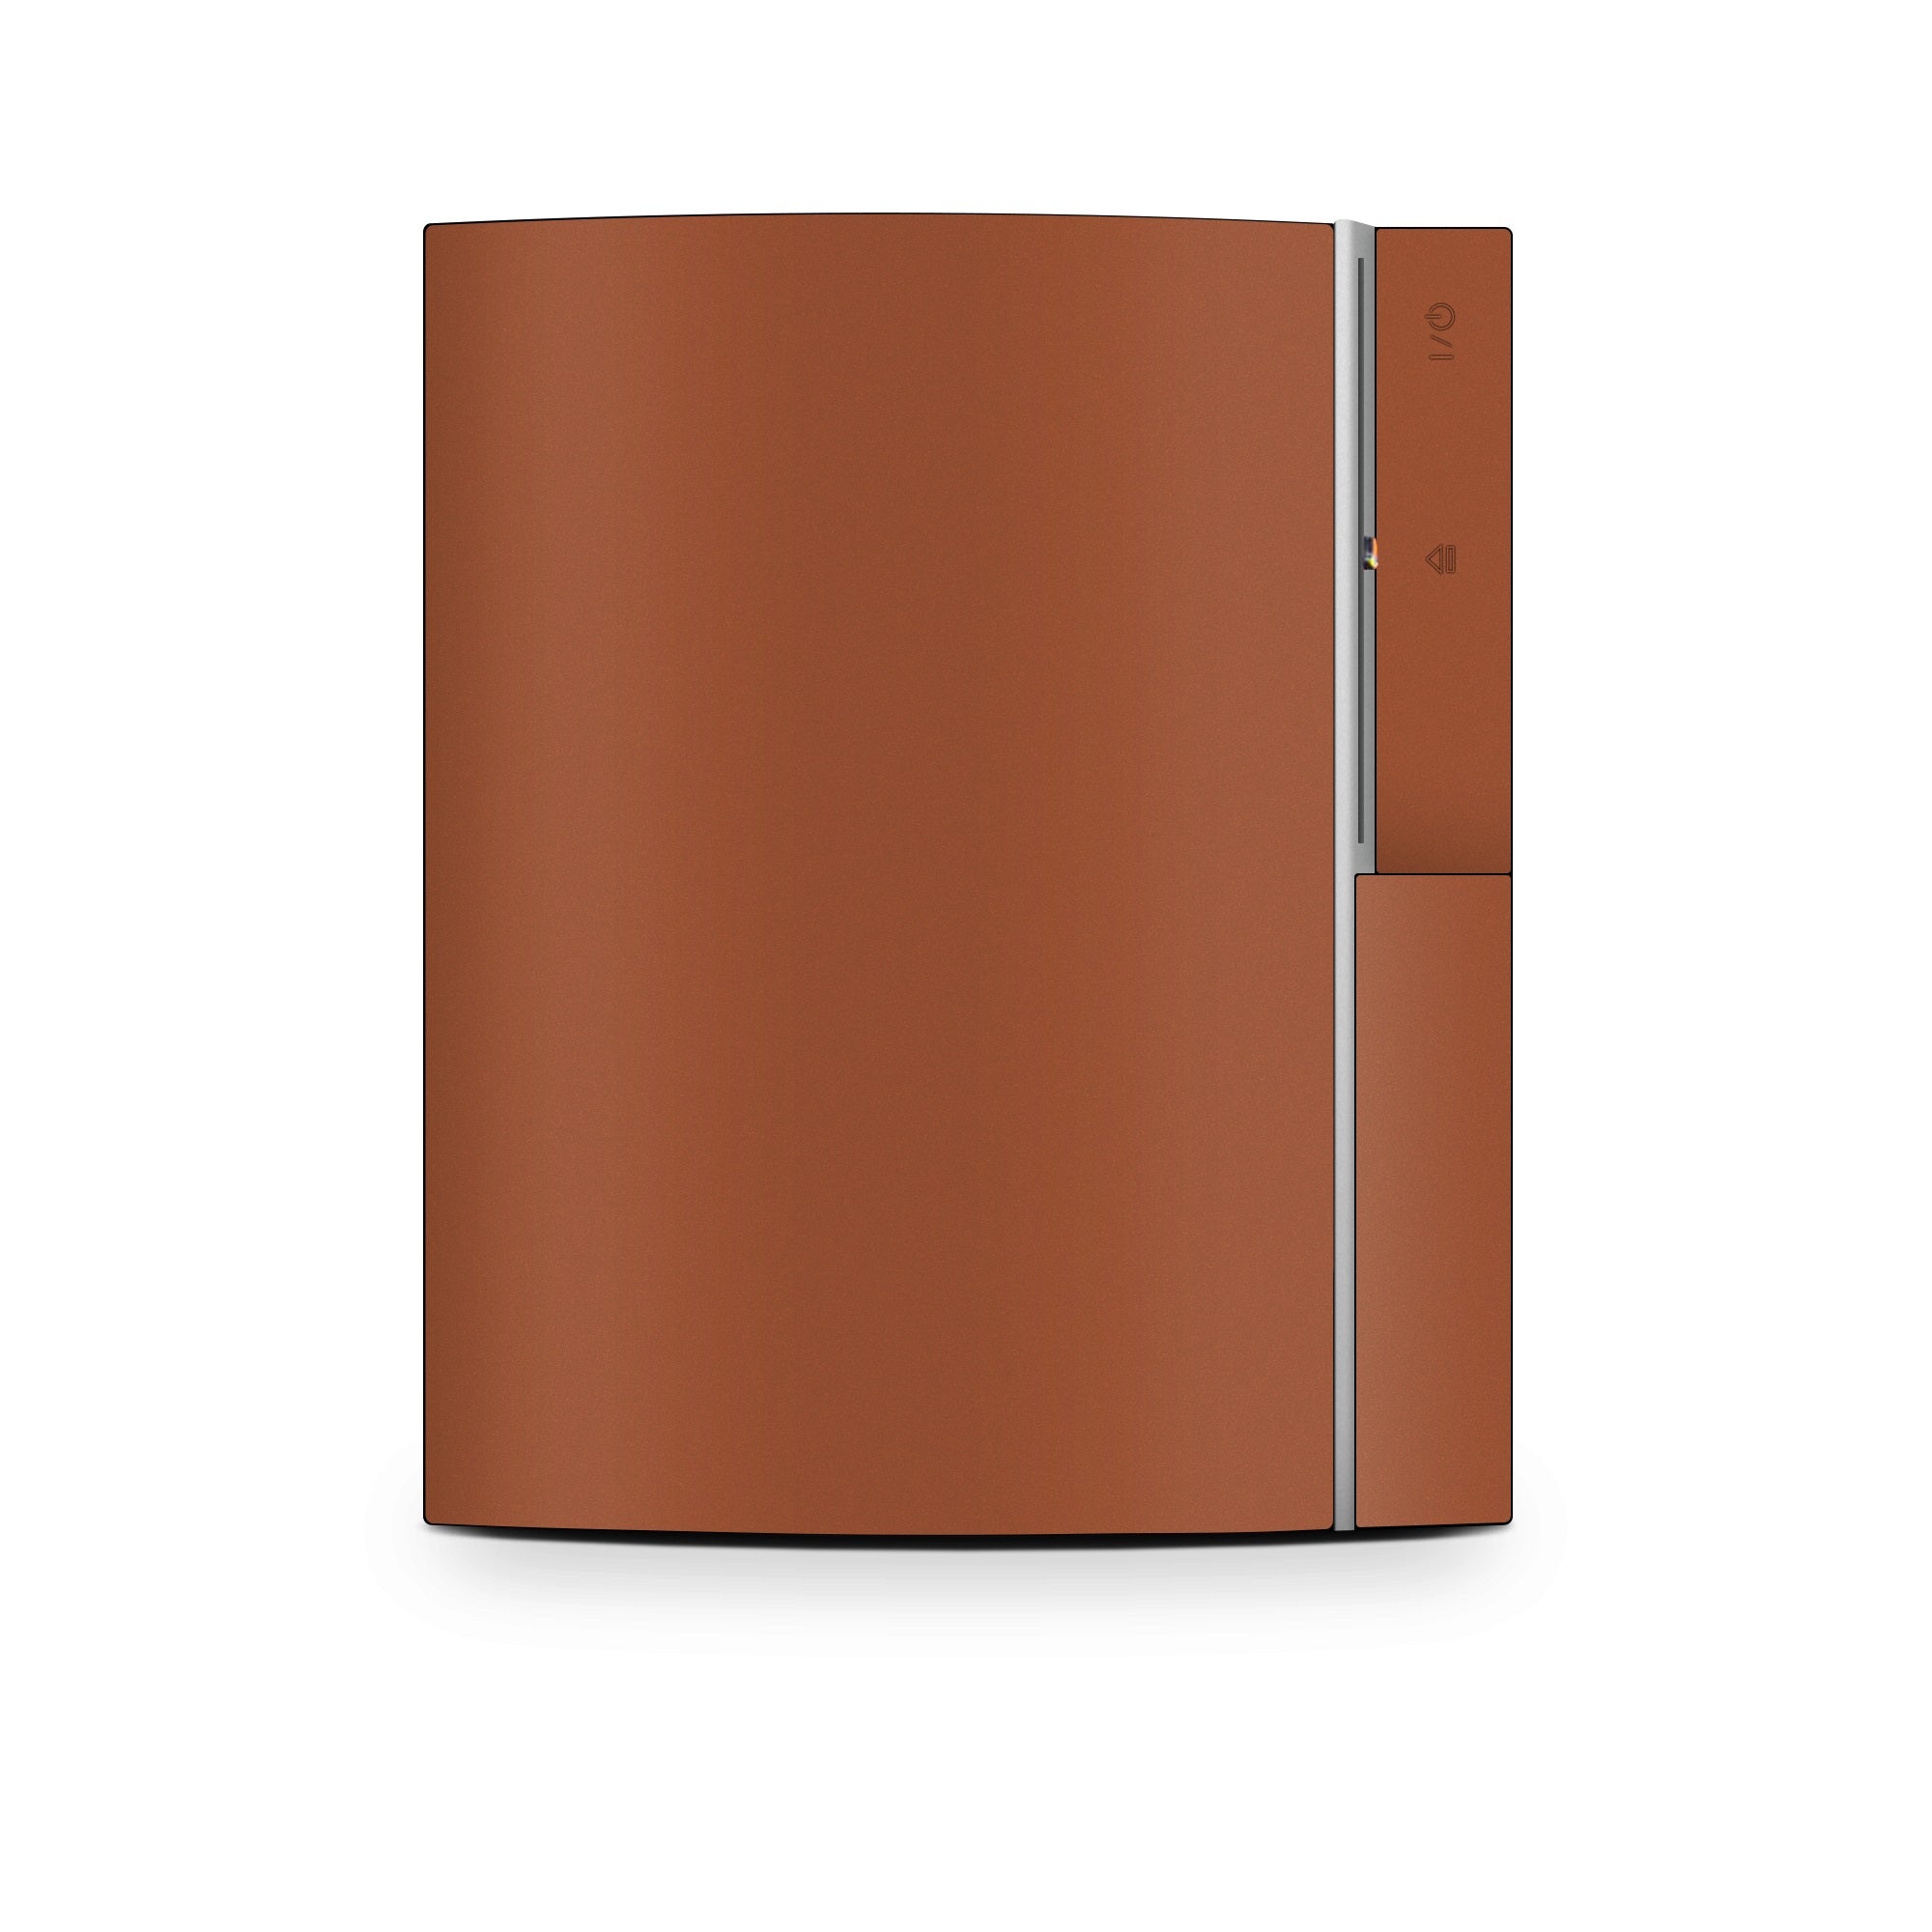 Solid State Cinnamon - Sony PS3 Skin